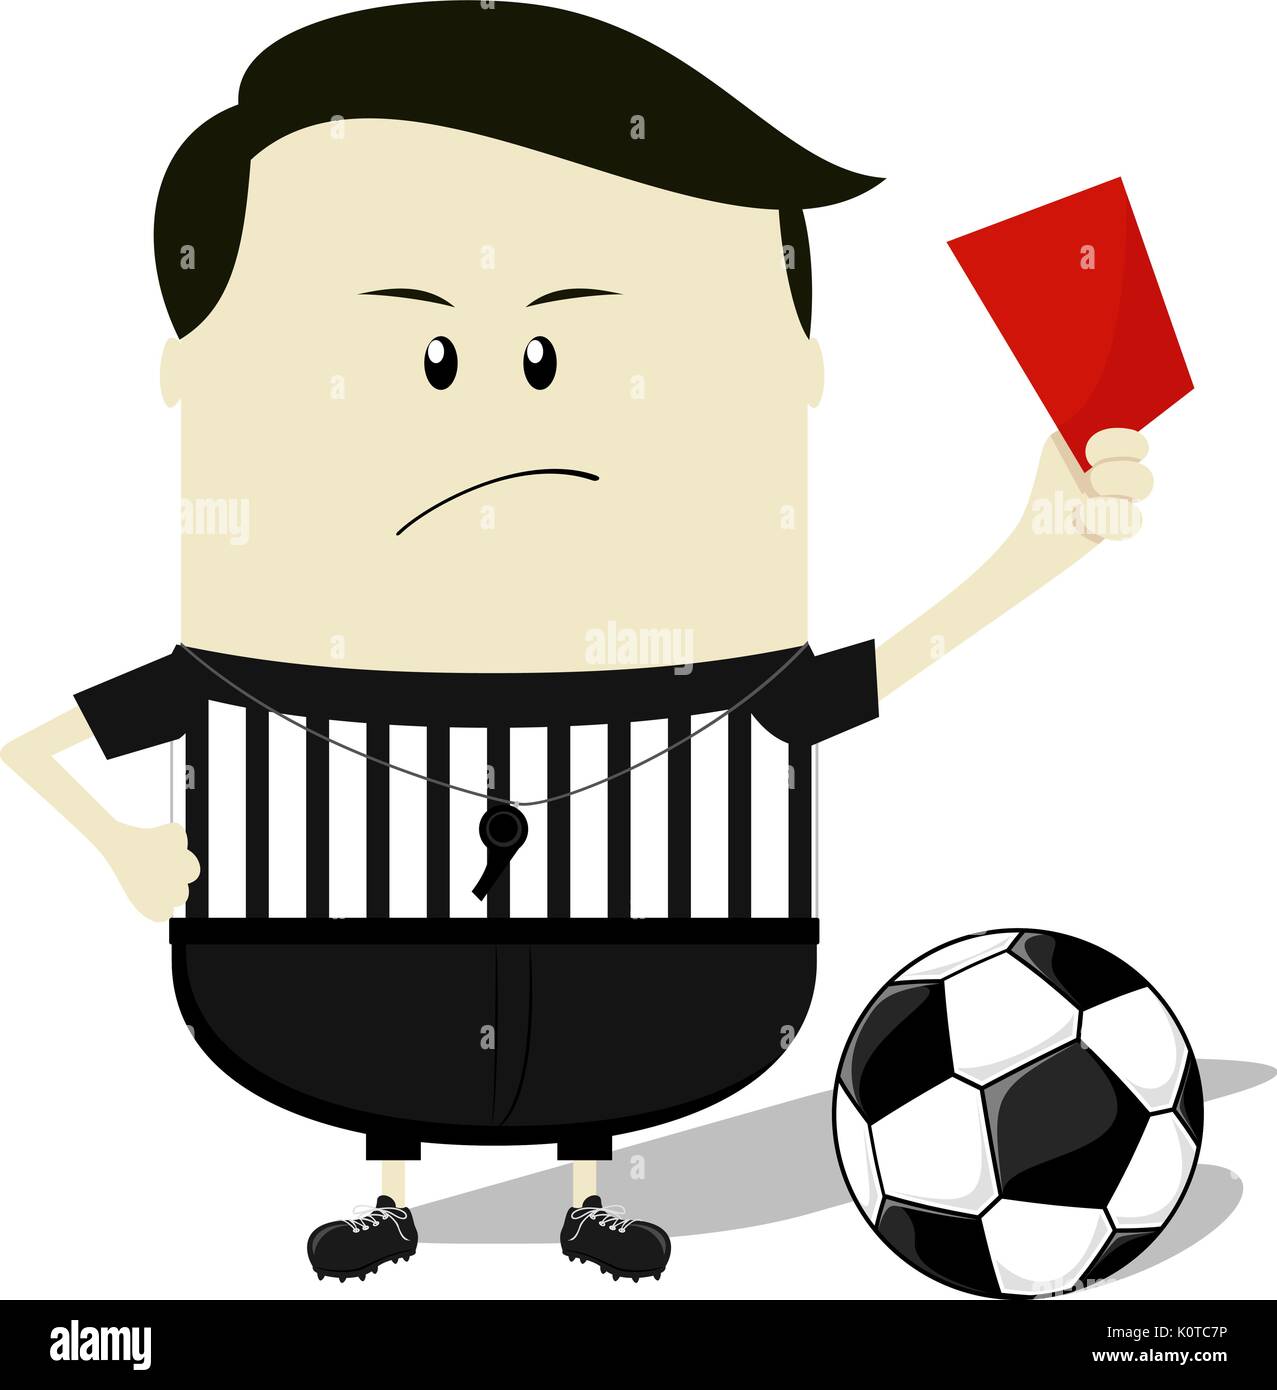 cartoon illustration of soccer referee showing red card Stock Vector